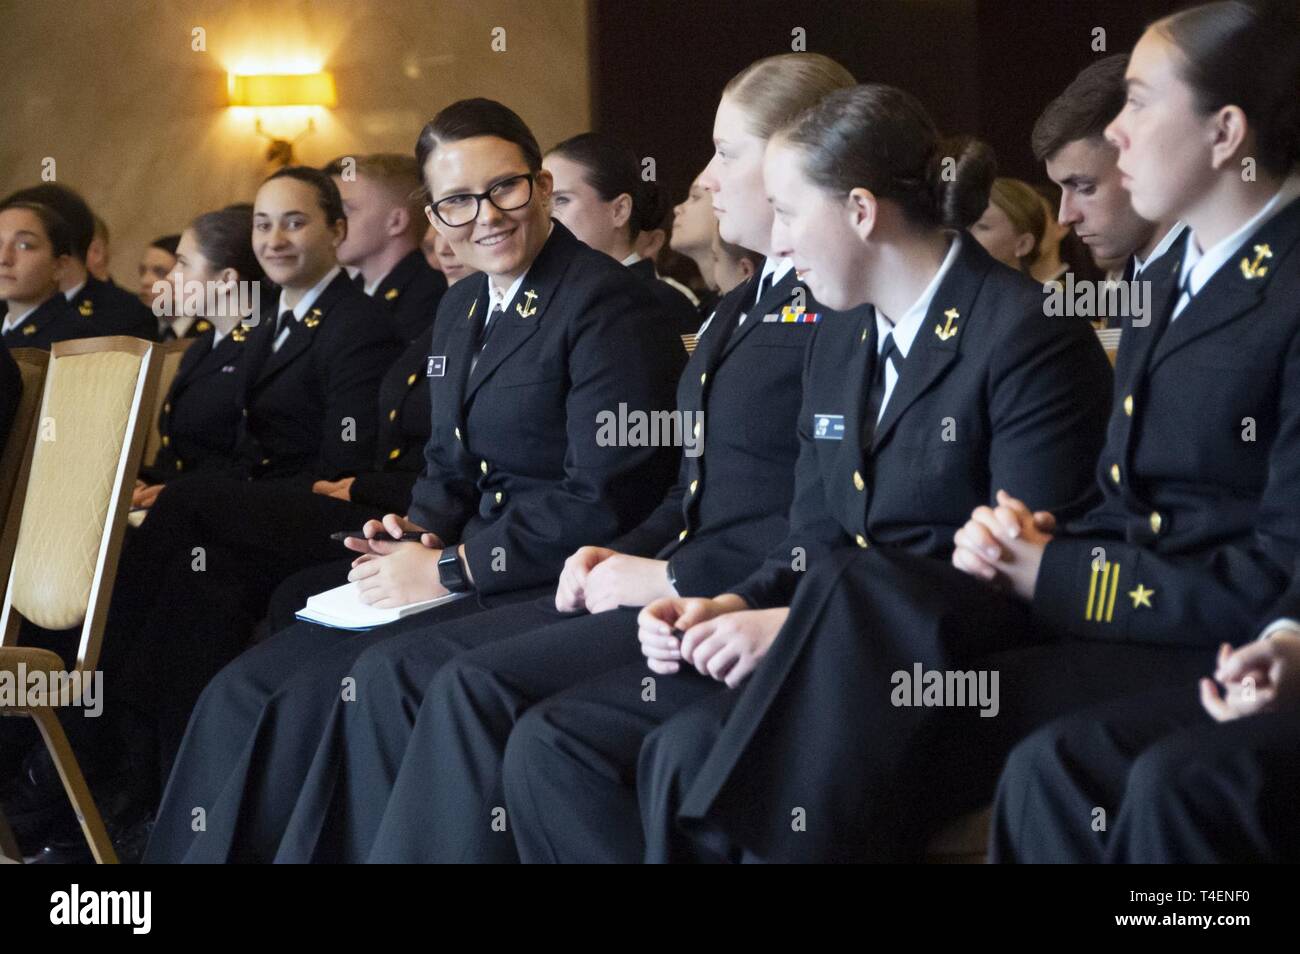 ANN ARBOR, Mi. (March 30, 2019) – Midshipmen participate in group discussion during the Women in Naval Service symposium hosted by the University of Michigan Naval Reserve Officers Training Corps unit at the Graduate hotel in Ann Arbor. This event was held in conjunction with the U.S. Navy's observation of Women's History Month and provided over 150 midshipmen from units across the country with the opportunity to interact and learn from female leaders serving across the fleet. Stock Photo